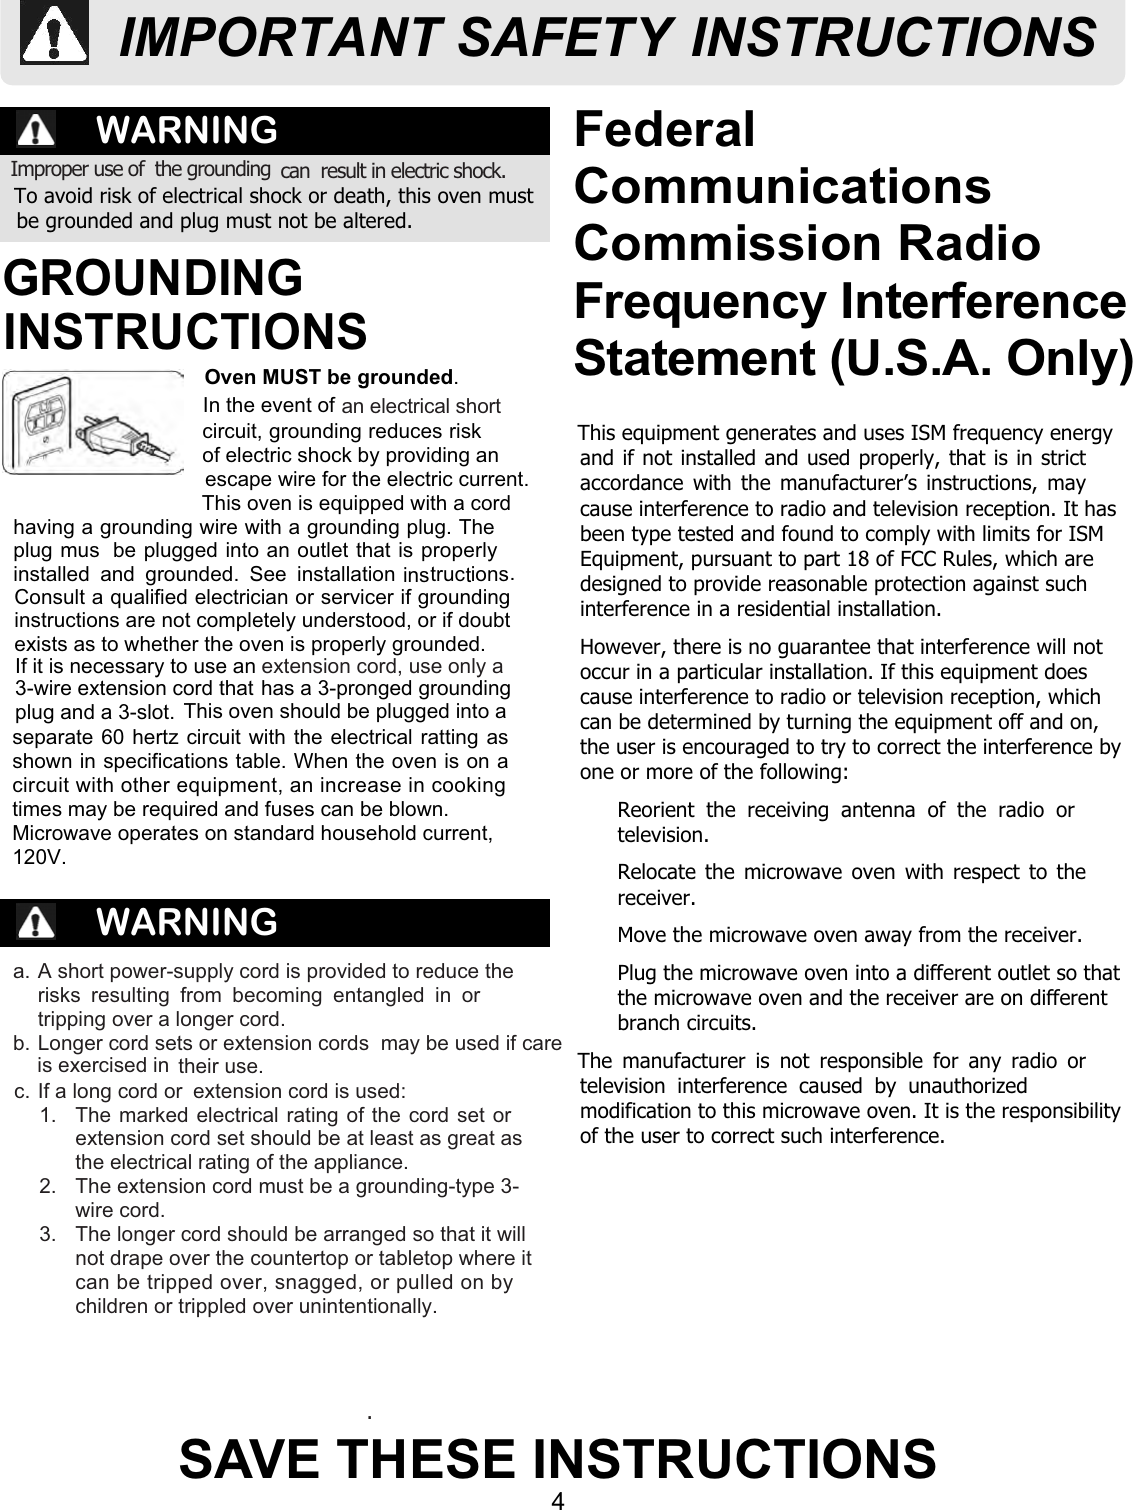 4SAVE THESE INSTRUCTIONSFederalCommunicationsCommission RadioFrequency InterferenceStatement (U.S.A. Only)WARNINGWARNINGTo avoid risk of electrical shock or death, this oven mustbe grounded and plug must not be altered.a. A short power-supply cord is provided to reduce therisks resulting from becoming entangled in ortripping over a longer cord.their use.1.  The marked electrical rating of the cord set orextension cord set should be at least as great asthe electrical rating of the appliance.2.  The extension cord must be a grounding-type 3-wire cord.3.  The longer cord should be arranged so that it willnot drape over the countertop or tabletop where itcan be tripped over, snagged, or pulled on by.Oven MUST be grounded.Consult a qualified electrician or servicer if groundinginstructions are not completely understood, or if doubtexists as to whether the oven is properly grounded.This oven should be plugged into aseparate 60 hertz circuit with the electrical ratting asshown in specifications table. When the oven is on acircuit with other equipment, an increase in cooking Microwave operates on standard household current, 120V.This equipment generates and uses ISM frequency energyand if not installed and used properly, that is in strictaccordance with the manufacturer’s instructions, maycause interference to radio and television reception. It hasbeen type tested and found to comply with limits for ISMEquipment, pursuant to part 18 of FCC Rules, which aredesigned to provide reasonable protection against suchinterference in a residential installation.However, there is no guarantee that interference will notoccur in a particular installation. If this equipment doescause interference to radio or television reception, whichcan be determined by turning the equipment off and on,the user is encouraged to try to correct the interference byone or more of the following:  Reorient the receiving antenna of the radio ortelevision.  Relocate the microwave oven with respect to thereceiver.  Move the microwave oven away from the receiver.  Plug the microwave oven into a different outlet so thatthe microwave oven and the receiver are on differentbranch circuits.The manufacturer is not responsible for any radio ortelevision interference caused by unauthorizedmodification to this microwave oven. It is the responsibilityof the user to correct such interference.Improper use of  the grounding can  result in electric shock. GROUNDING INSTRUCTIONSIn the event of  extension cord is used:an electrical short  This oven is equipped with a cordhaving a grounding wire with a grounding plug. Theplug mus  be plugged into an outlet that is properlyinstalled and grounded. See installation tructions.IMPORTANT SAFETY INSTRUCTIONSb. Longer cord sets or extension cords  may be used if care is exercised inc. If a long cord or children or trippled over unintentionally.3-wire extension cord thatplug and a 3-slot.If it is necessary to use an extension cord, use only a has a 3-pronged grounding times may be required and fuses can be blown.escape wire for the electric current.of electric shock by providing an circuit, grounding reduces risk ins